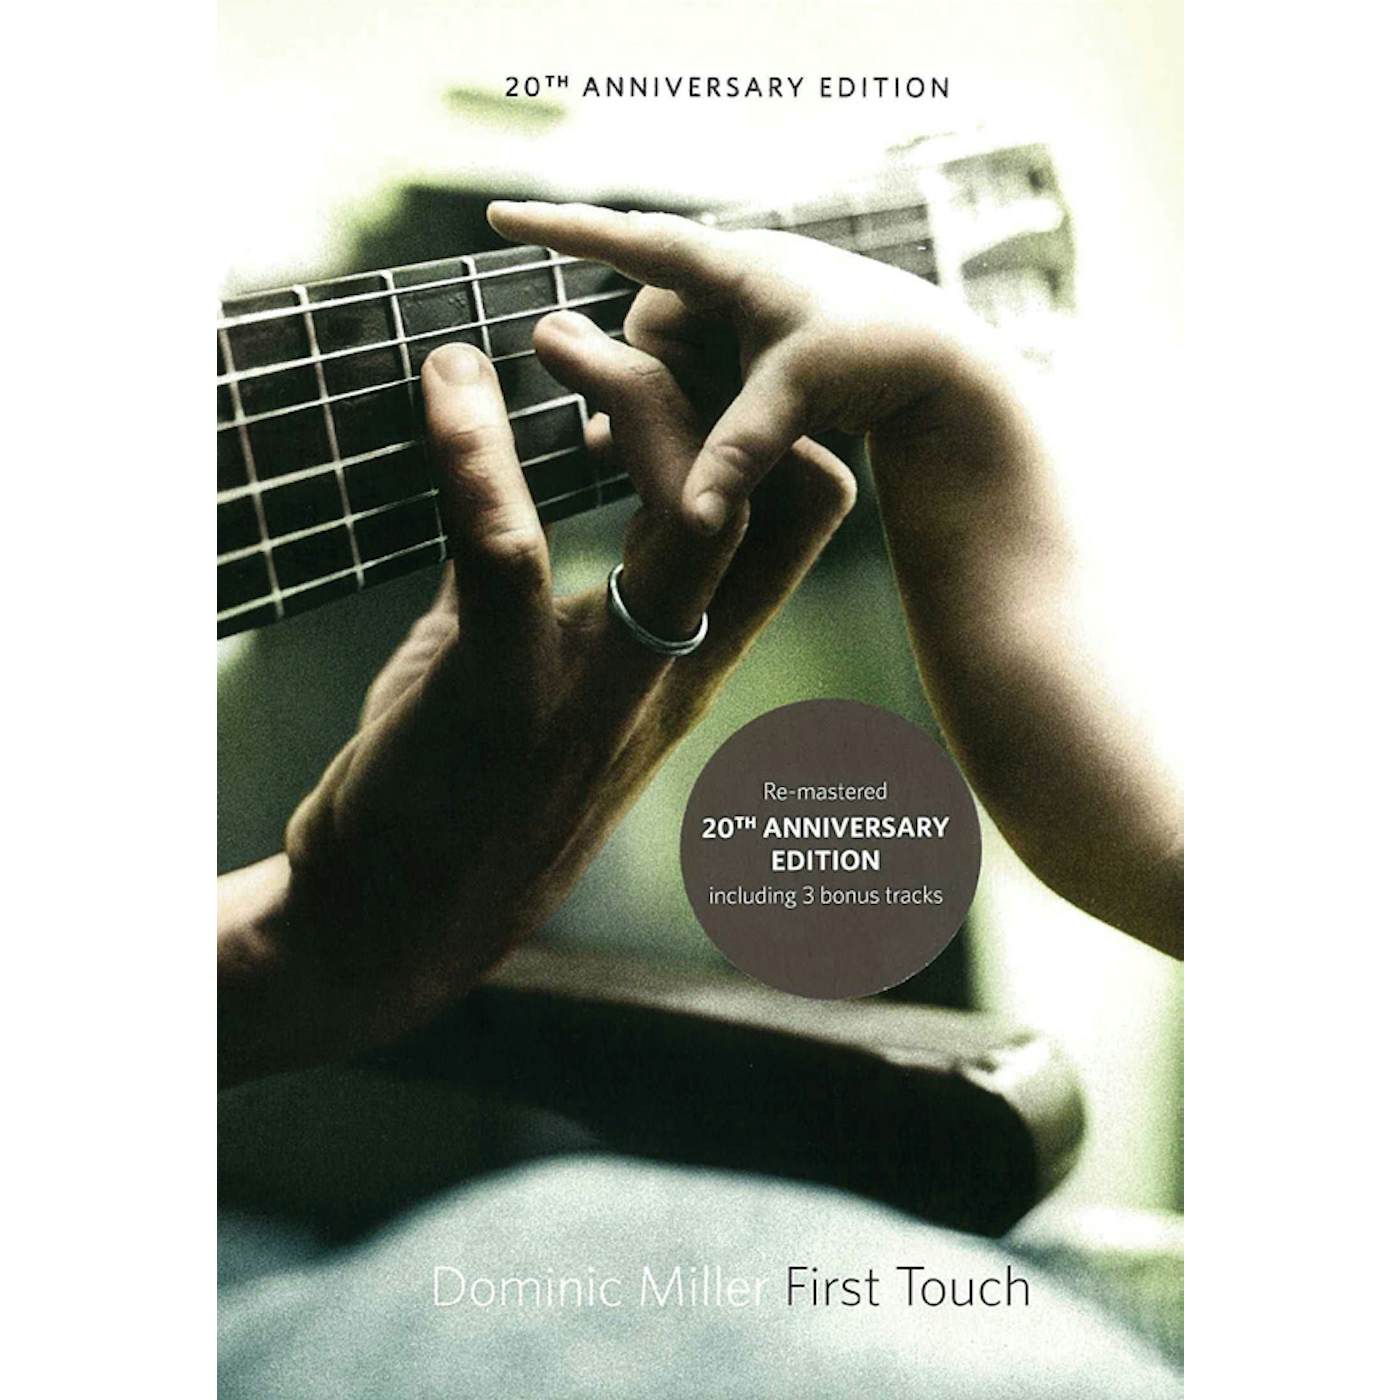 Dominic Miller FIRST TOUCH 20TH ANNIVERSARY EDITION CD